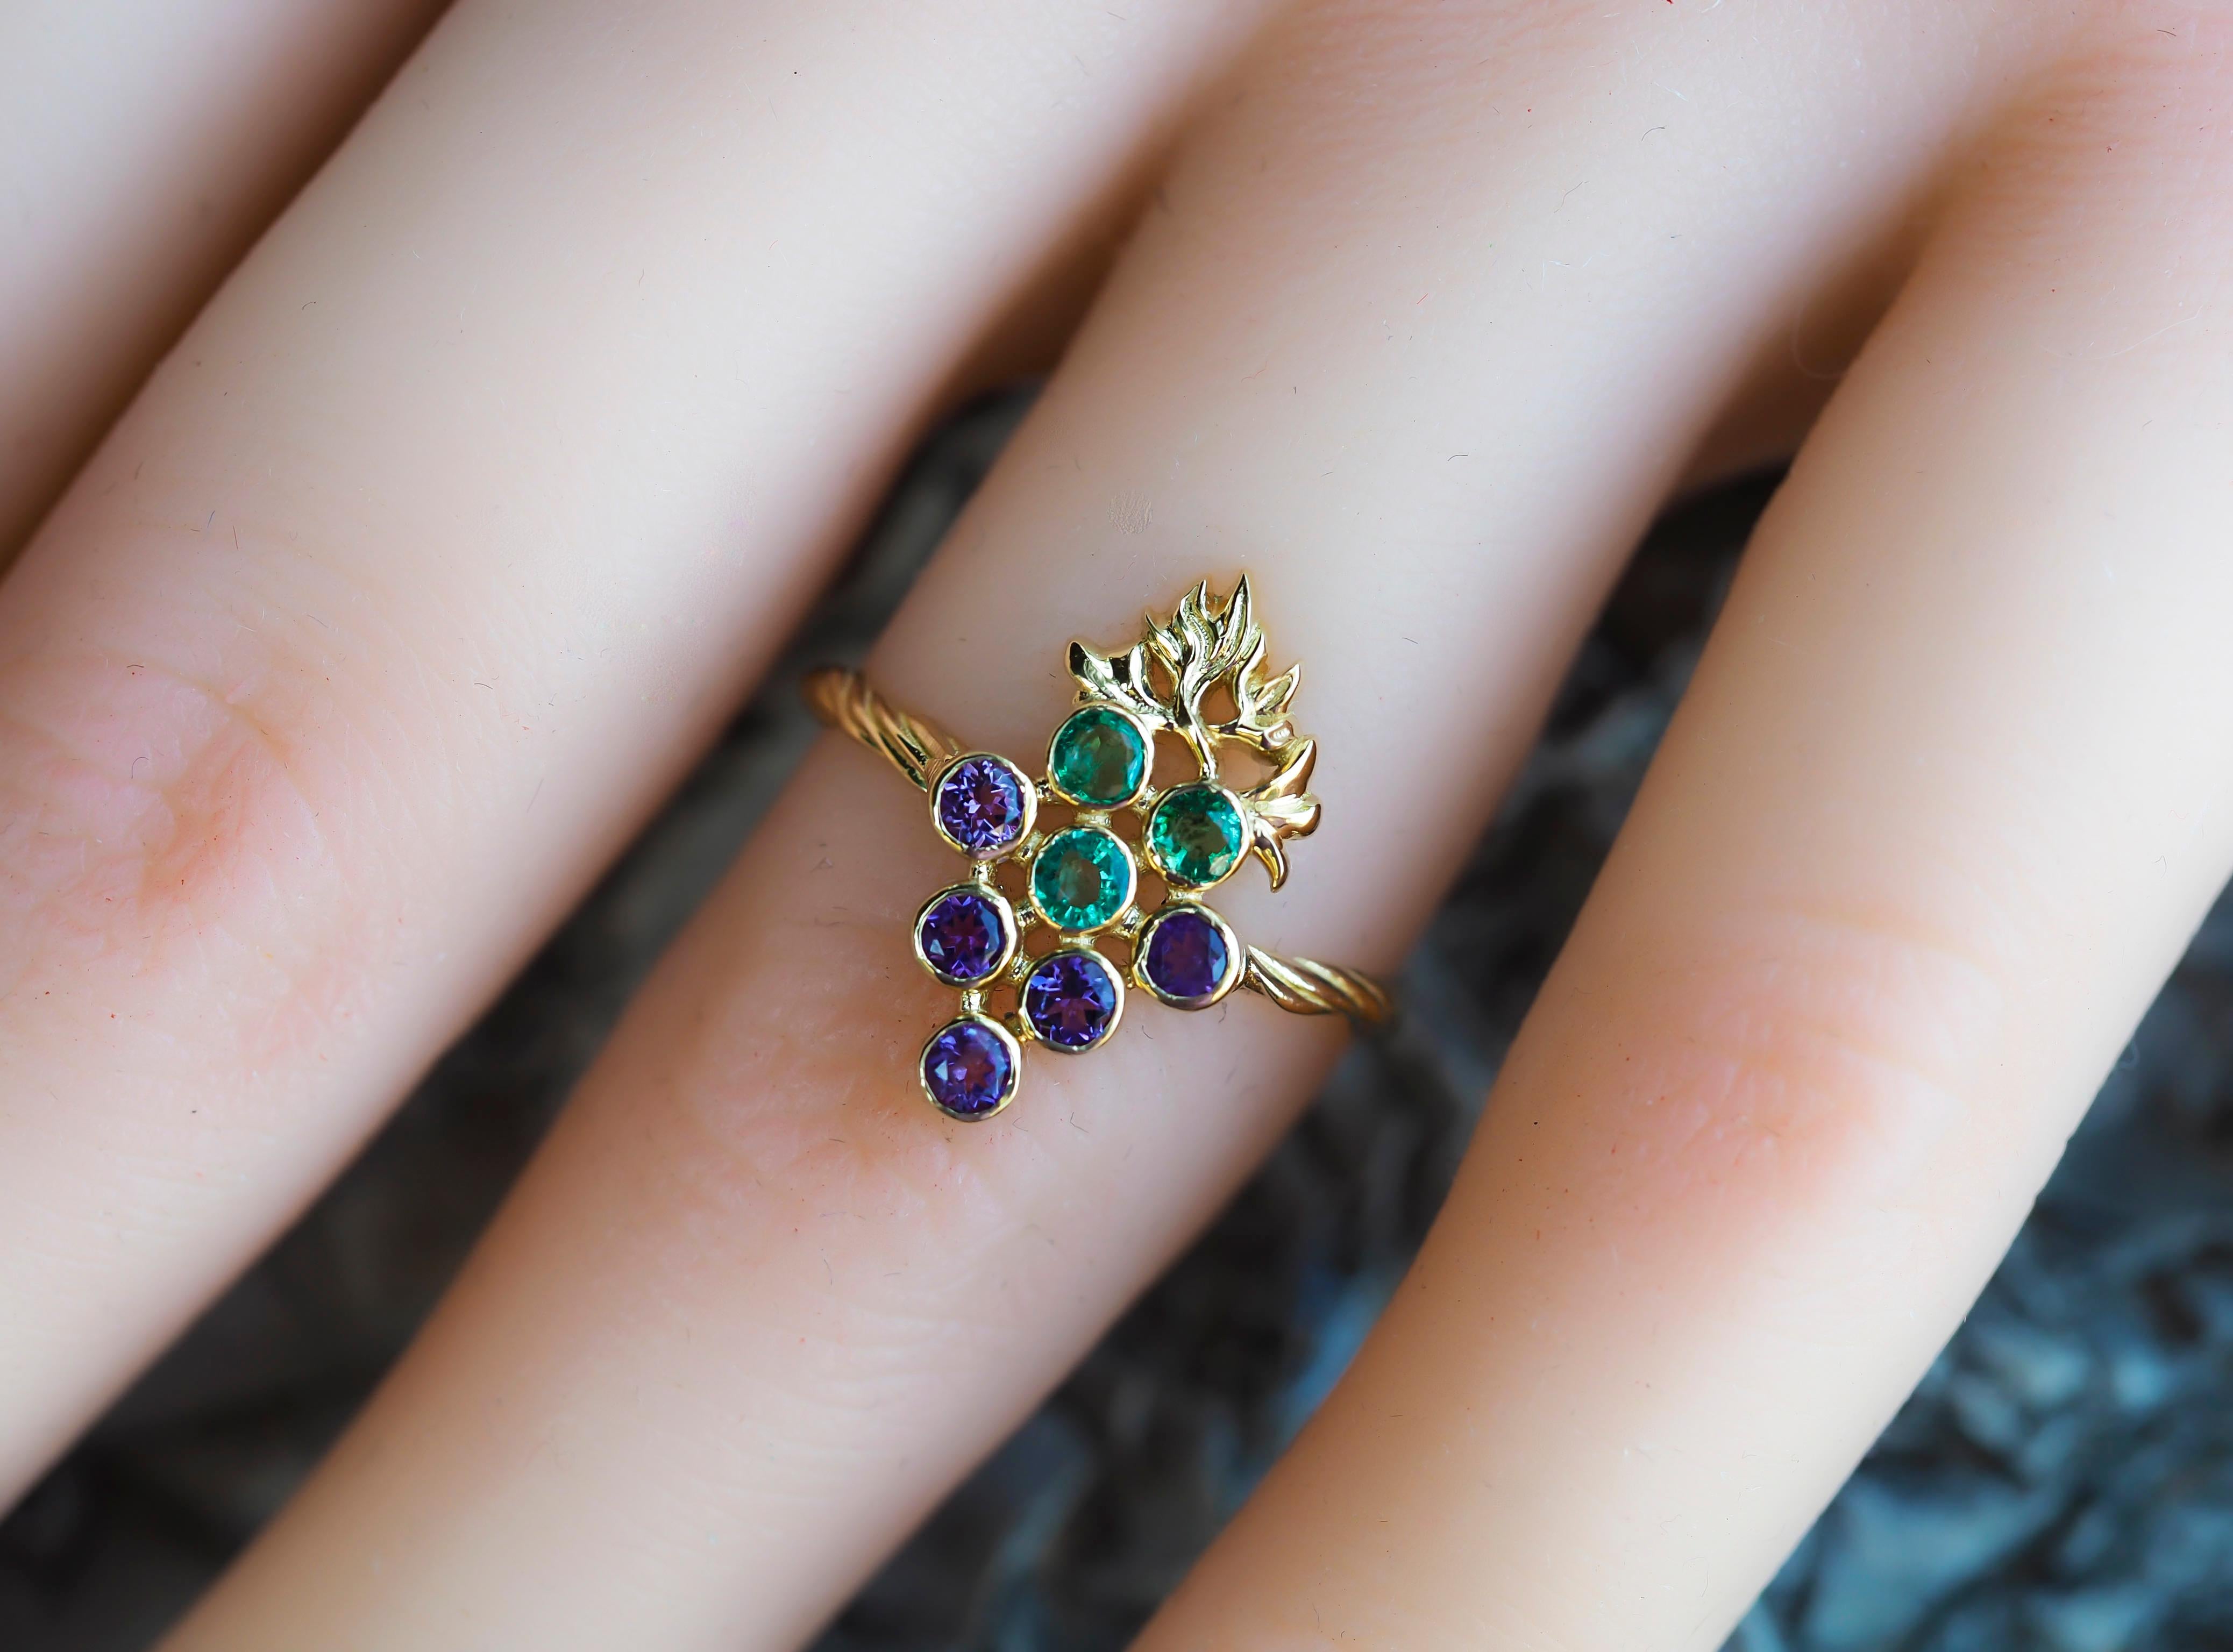 14k Gold Ring with Natural Emeralds and Amethysts, Grape Gold Ring 5